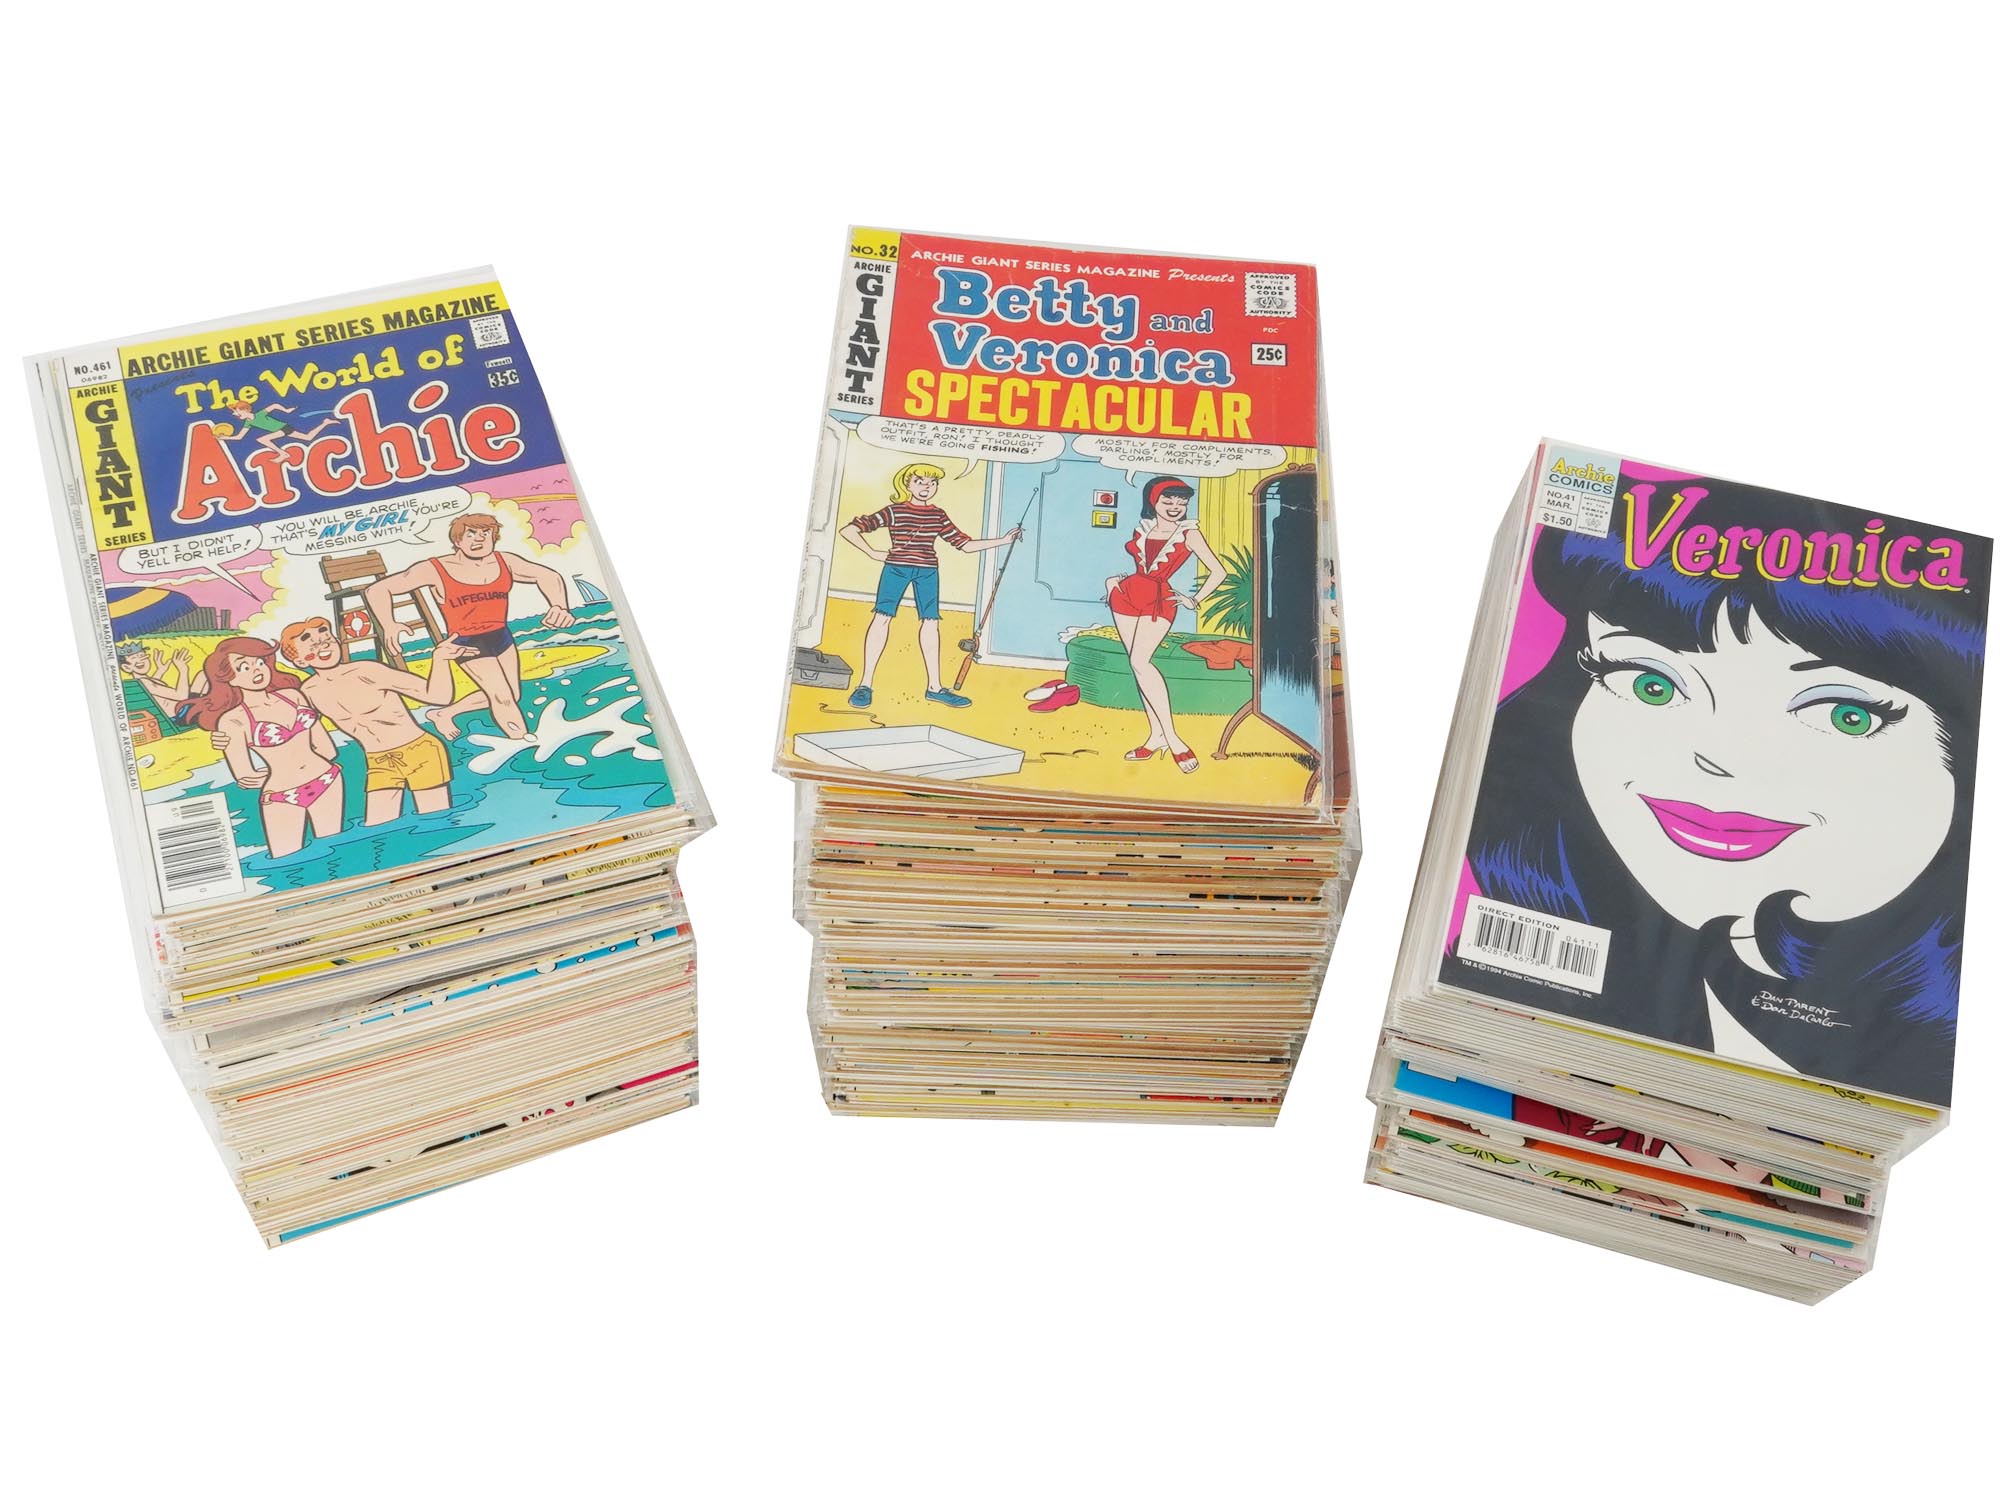 LARGE COLLECTION OF ARCHIE ILLUSTRATION COMICS BOOKS PIC-1